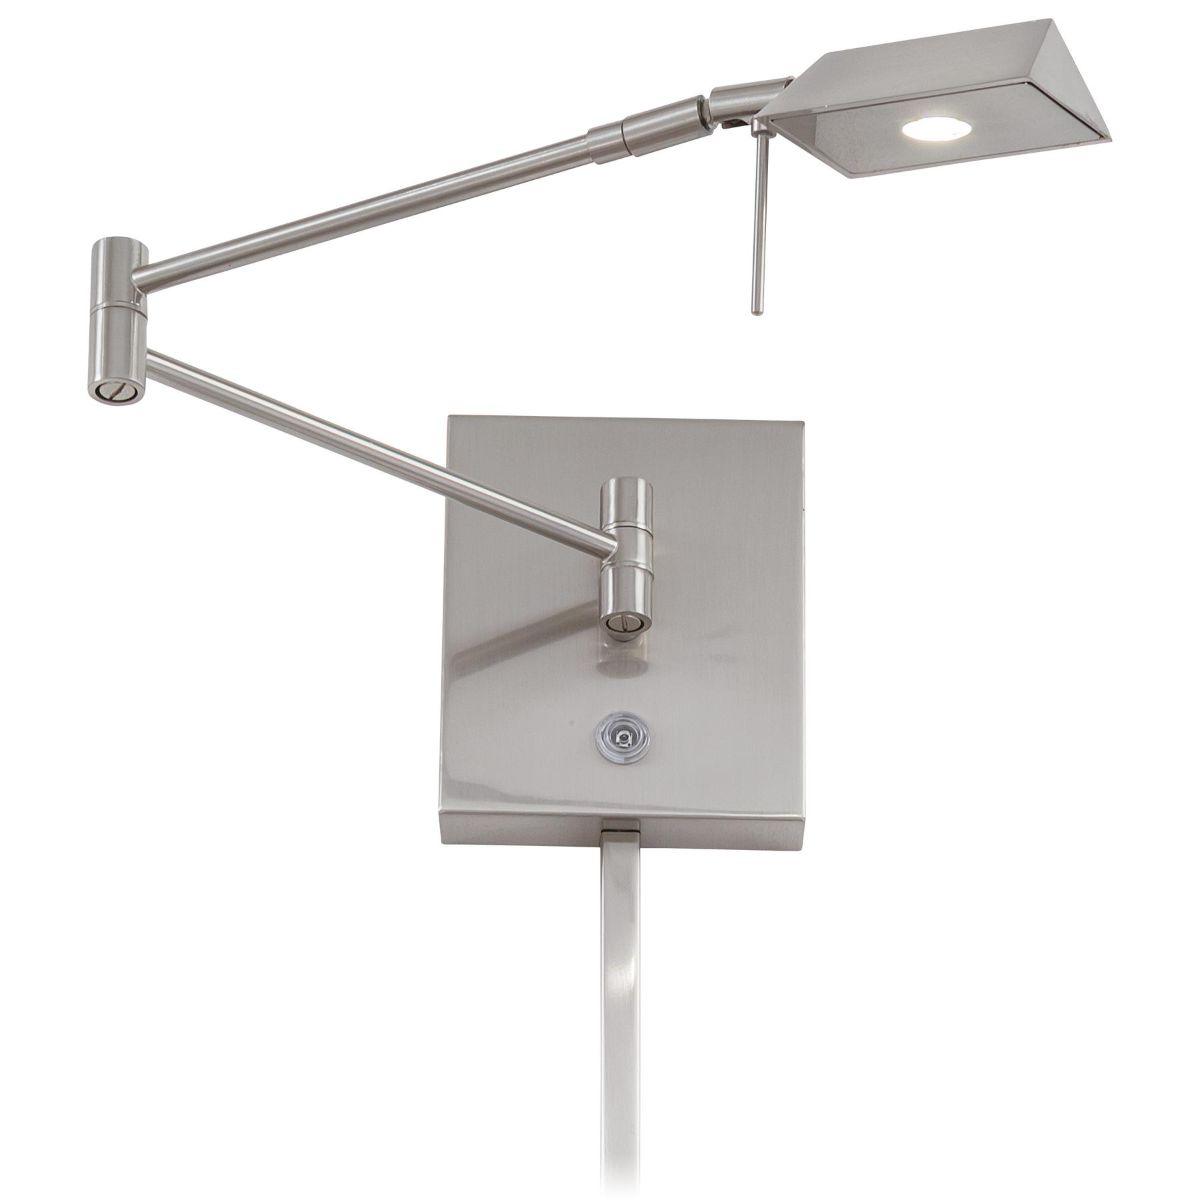 George's Reading Room Contemporary LED Swing Arm Wall Lamp - Bees Lighting